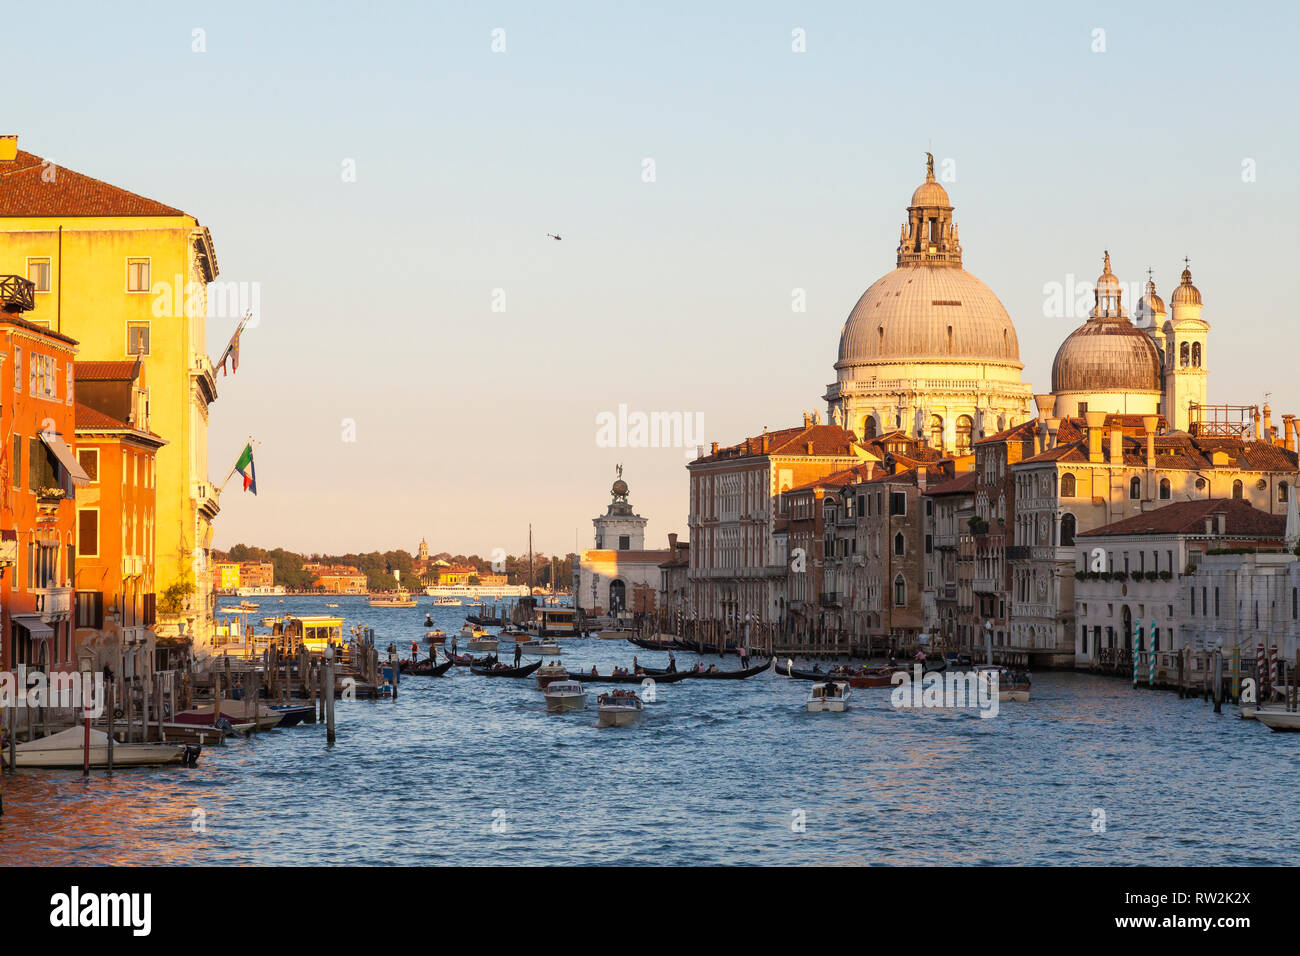 Sunset on the Grand Canal and Basilica di Santa Maria della Salute, Venice,  Veneto, Italy with multiple gondolas  on the canal and warm golden light Stock Photo